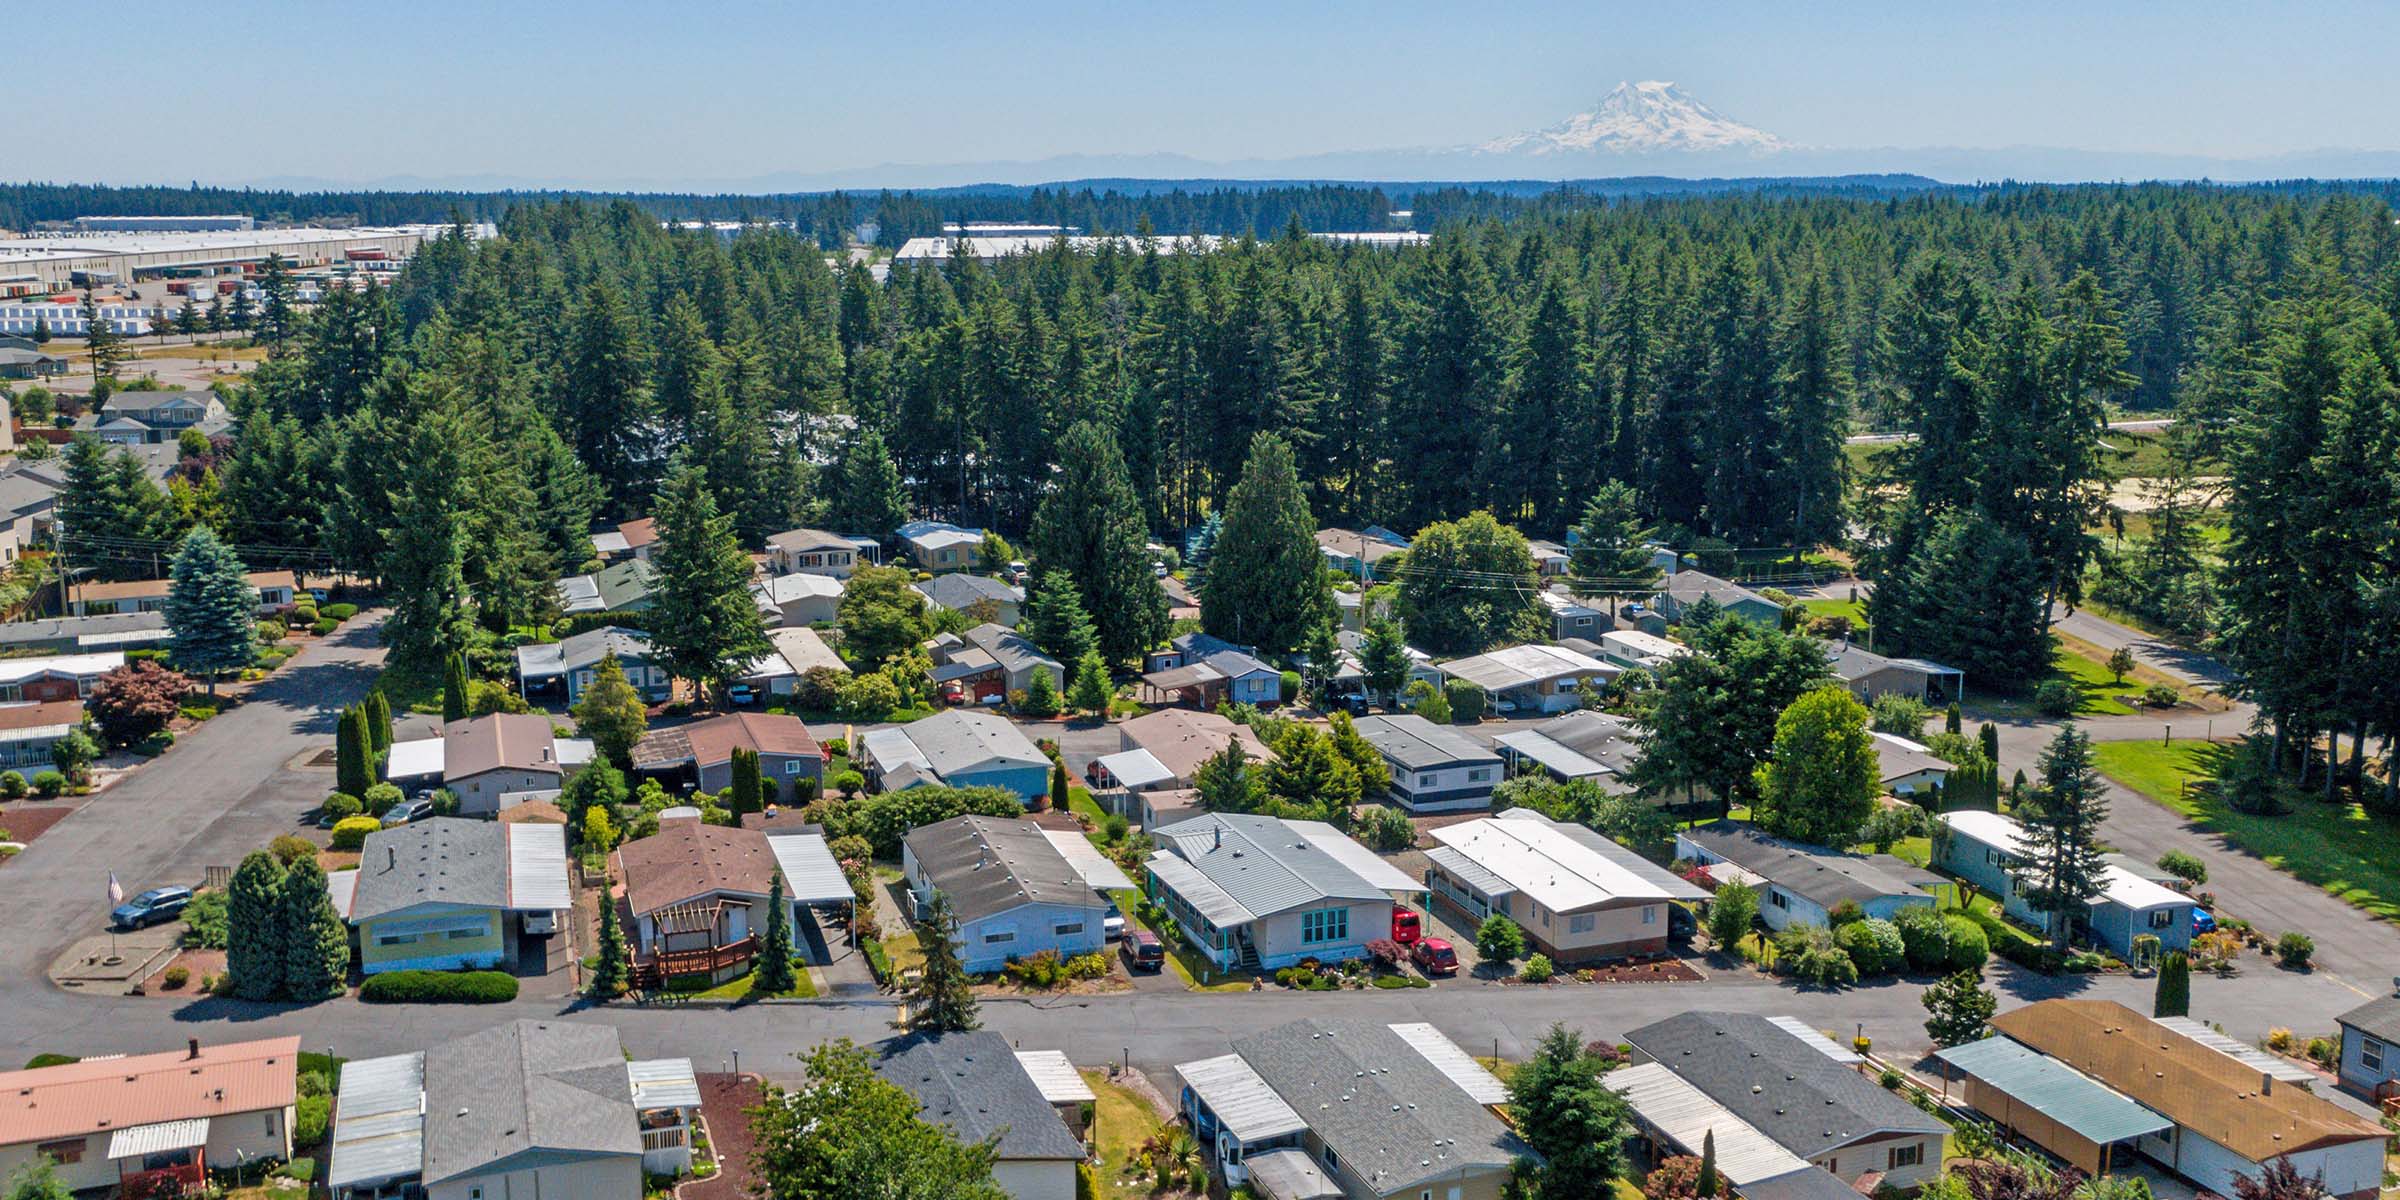 An aerial view of a mobile home park with mountains in the background.